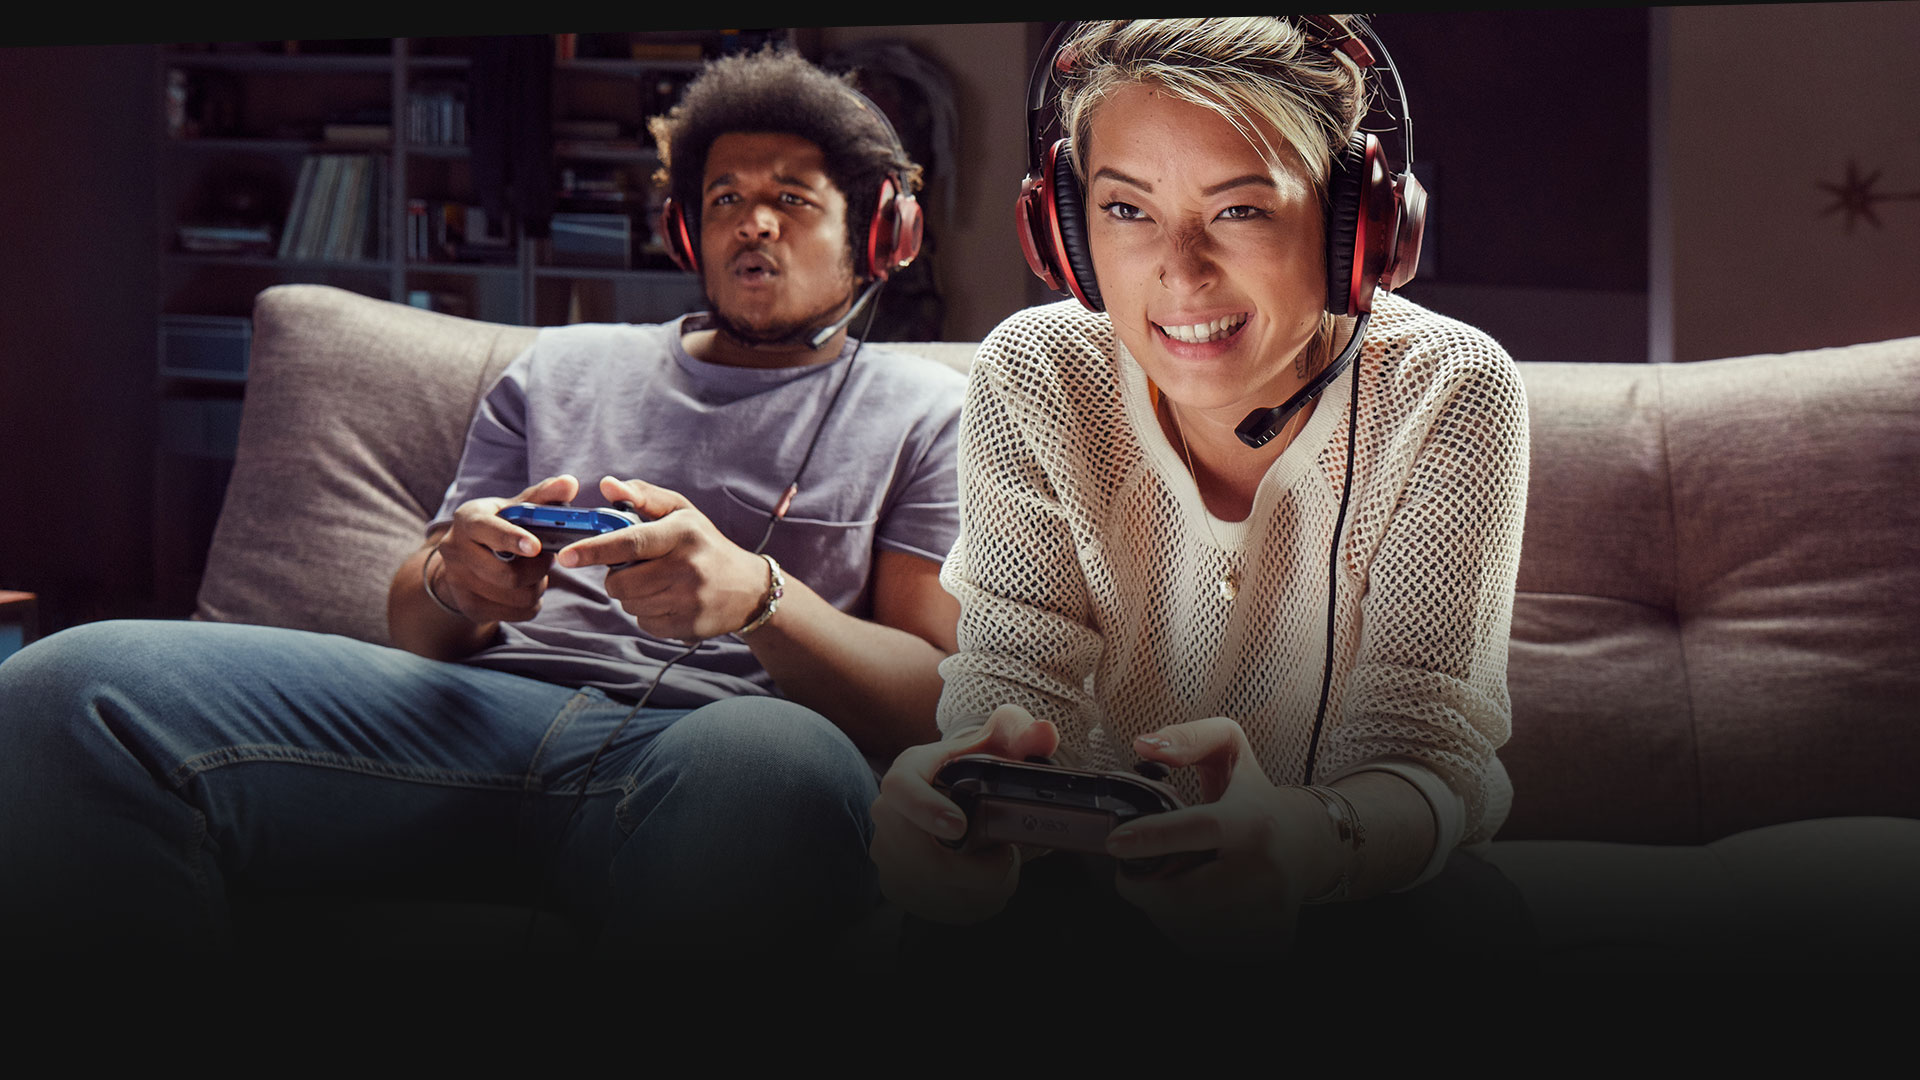 Two people wearing headsets playing Xbox one on a couch